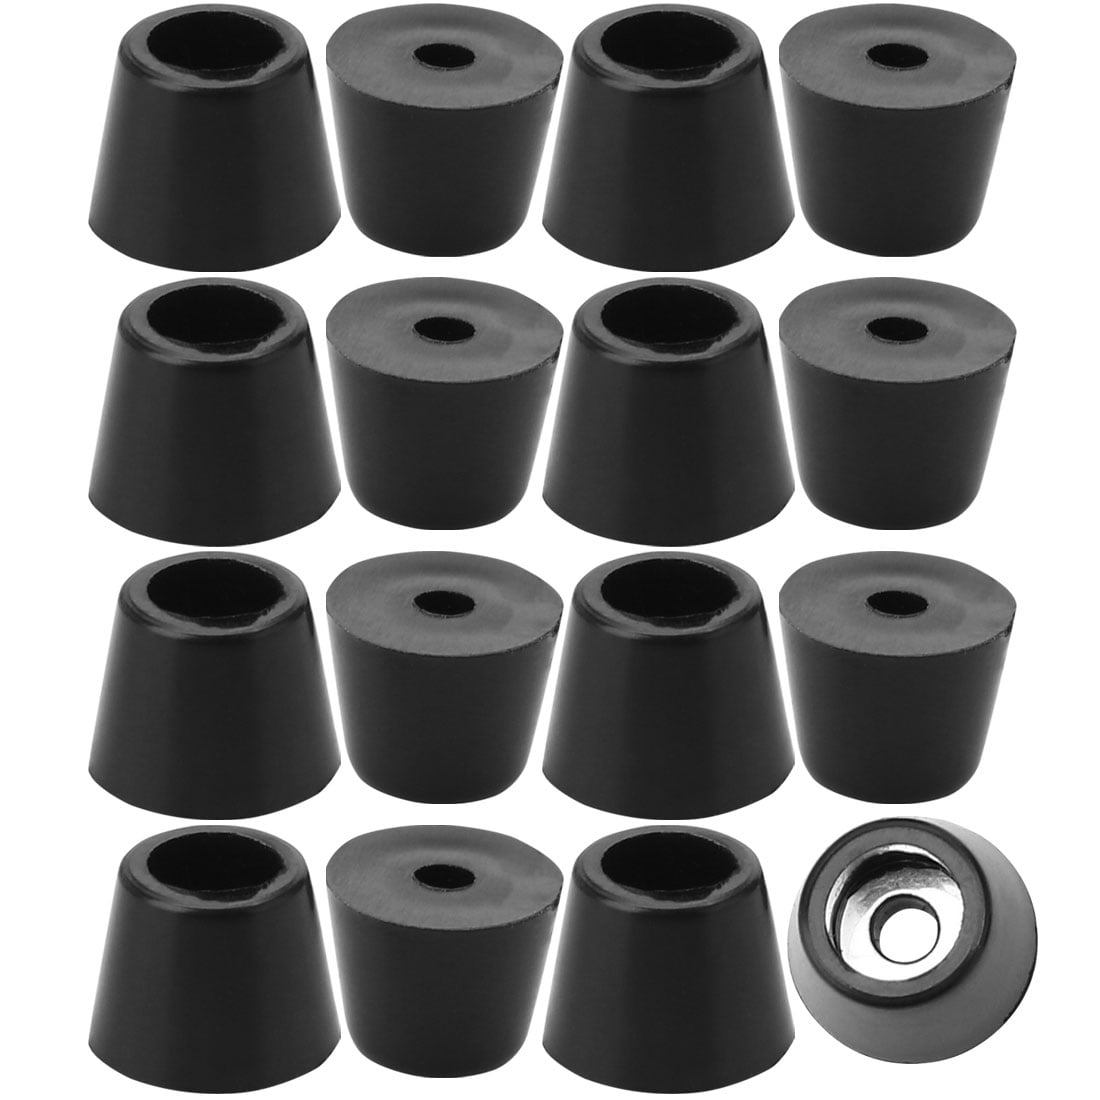 D24x20xH13mm uxcell 34pcs Rubber Feet Bumper Buffer Feet Furniture Table Cabinet Leg Pads Anti-slip with Metal Washer